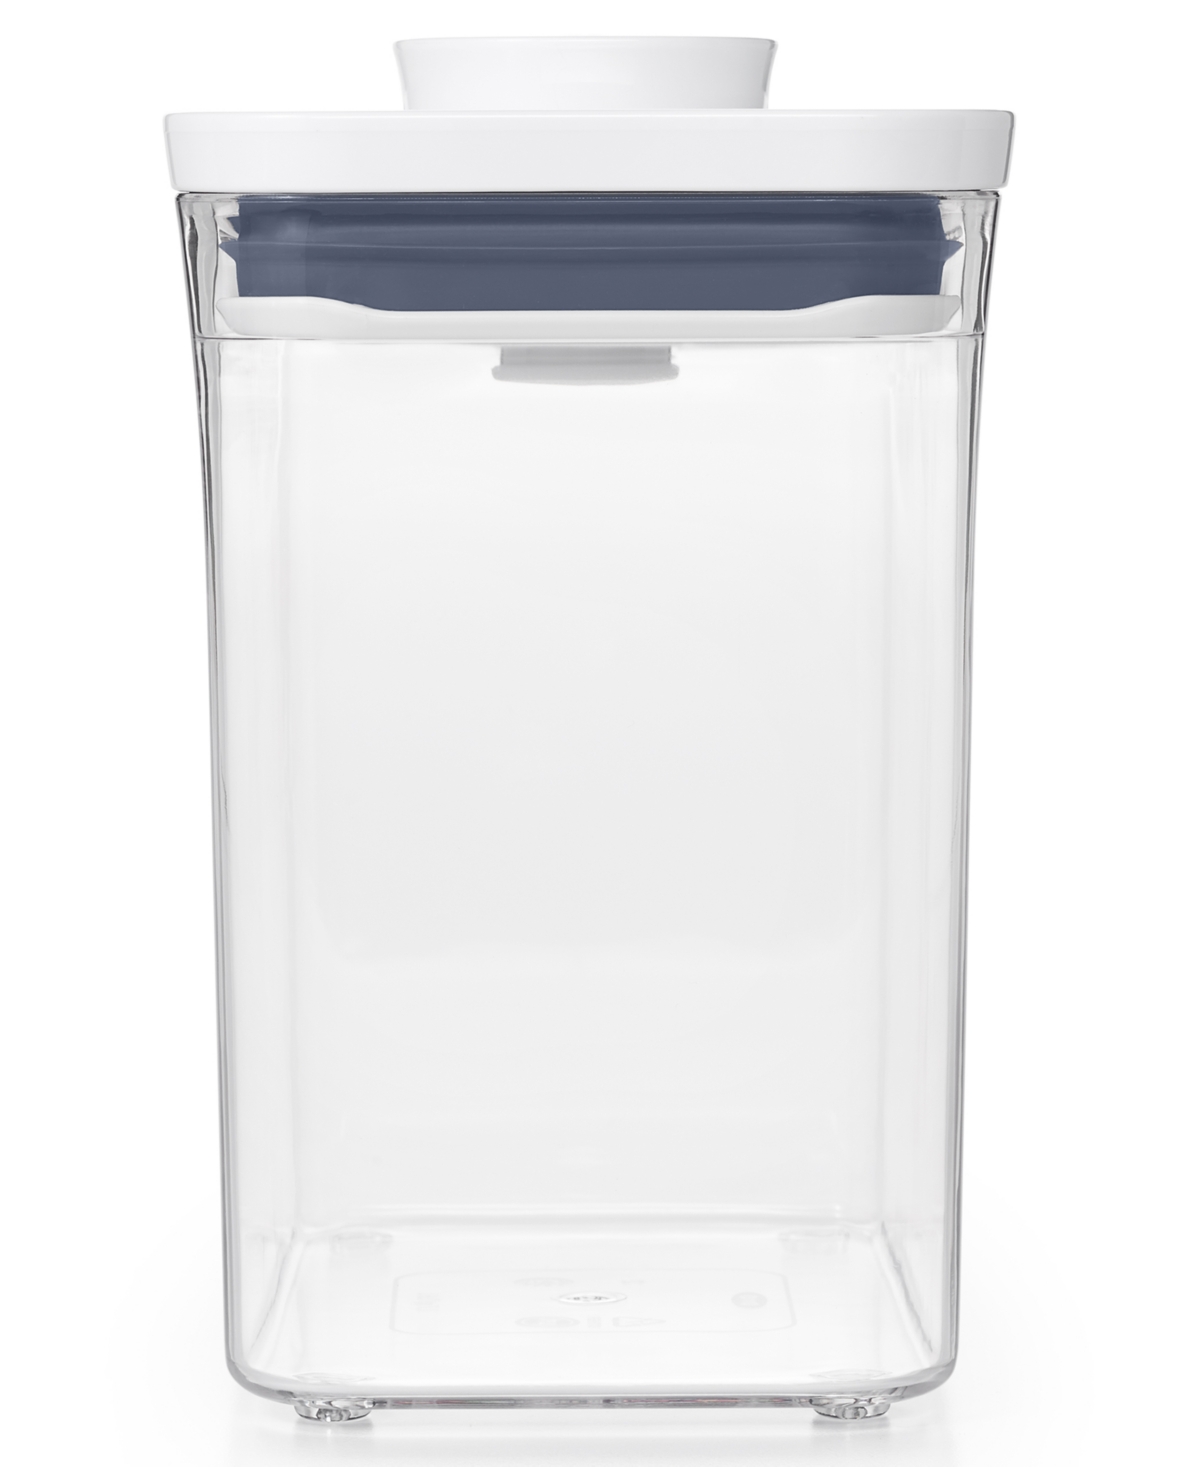 Pop Rectangular Short Food Storage Container - Clear